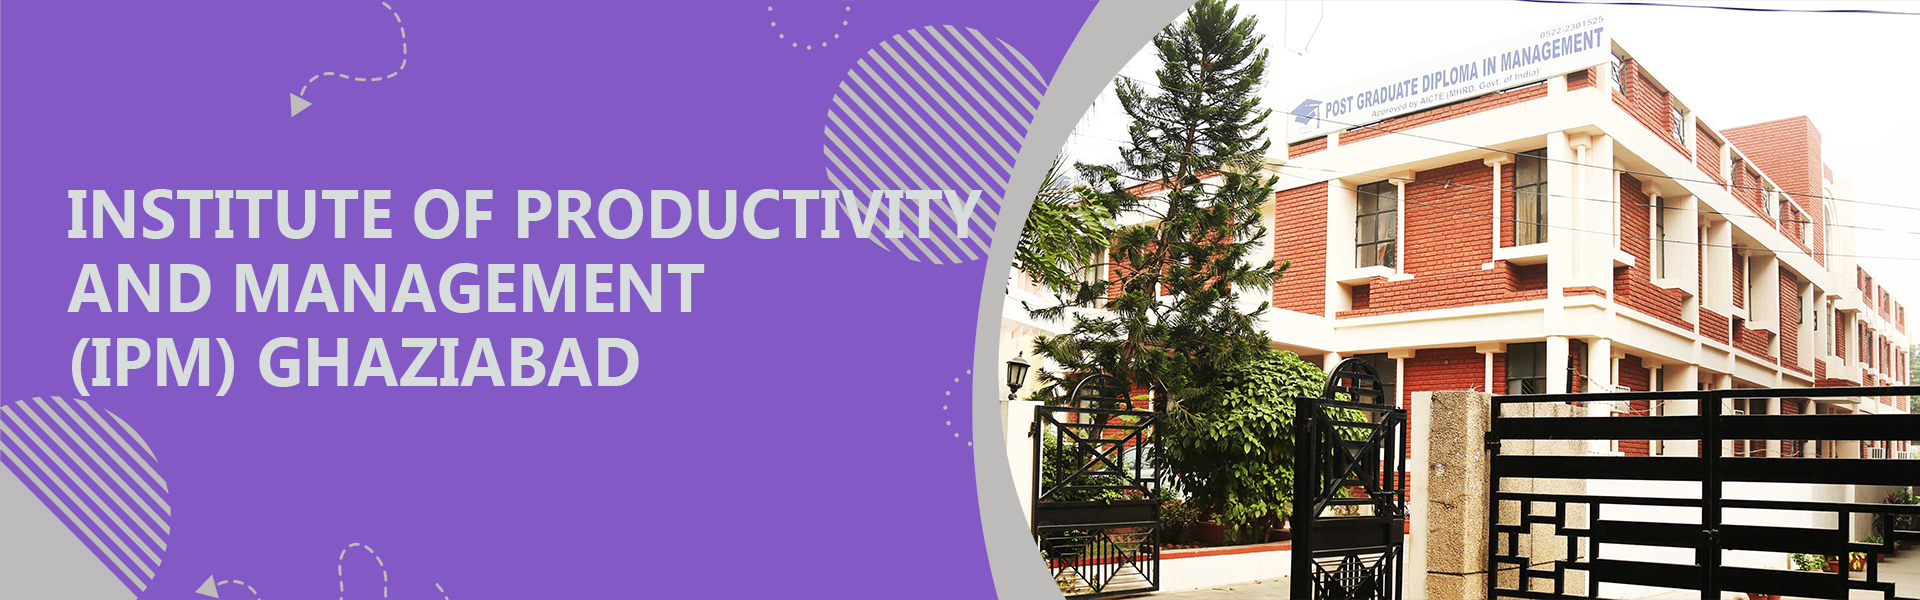 Institute Of Productivity And Management - [IPM], Ghaziabad